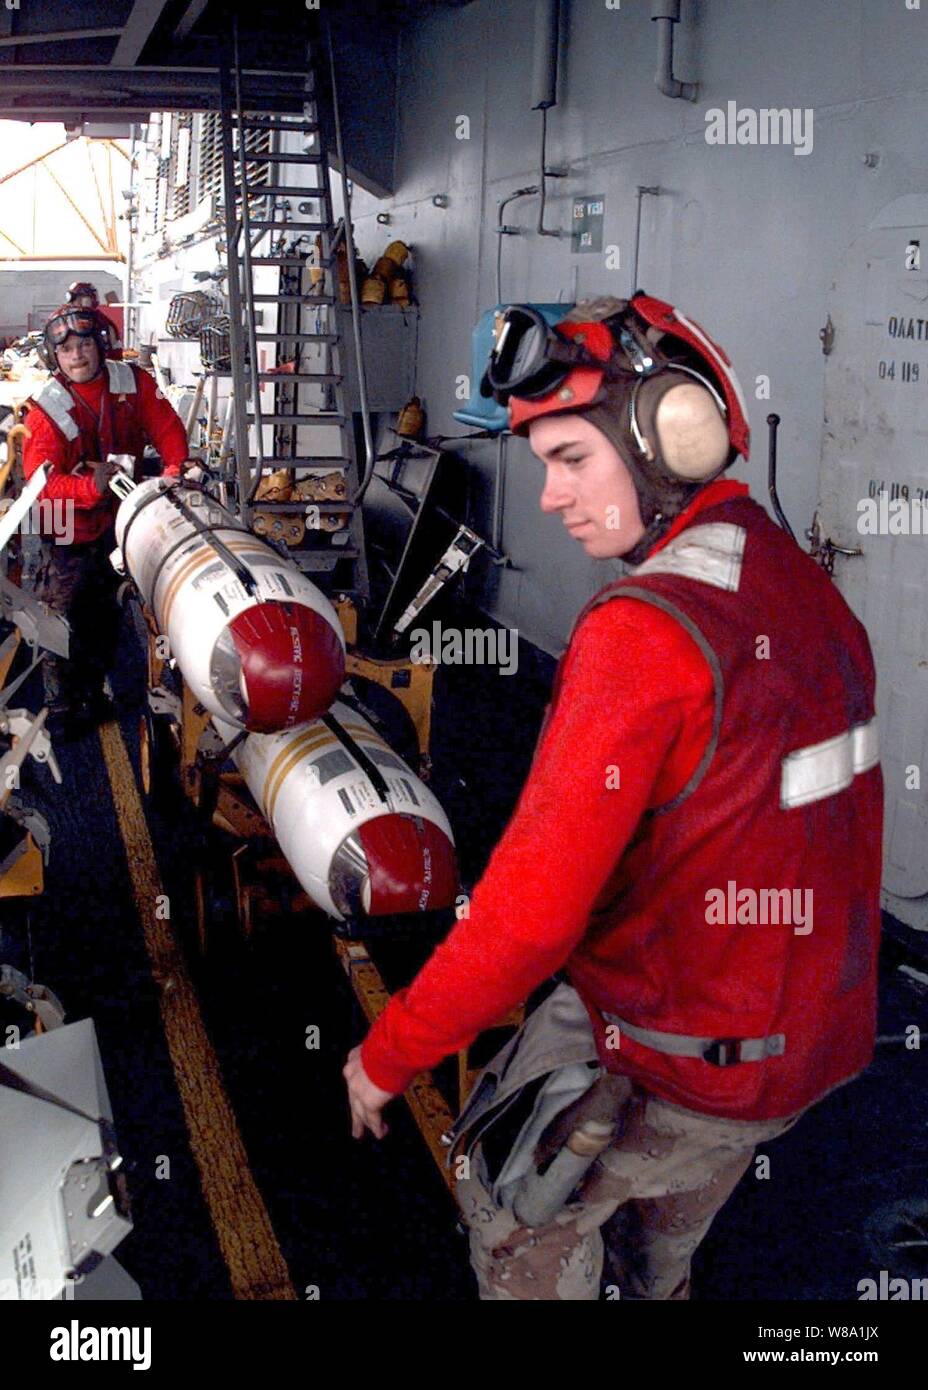 Airman David Rodriguez (right) guides a cart of cluster bombs into the staging area for munitions on the flight deck of the USS Independence (CV 62) while the ship operates in the Persian Gulf on Feb. 11, 1998.  Independence and its embarked Carrier Air Wing 5 are on station in the Persian Gulf in support of Operation Southern Watch which is the U.S. and coalition enforcement of the no-fly-zone over Southern Iraq.  Rodriguez is a Navy aviation ordnanceman. Stock Photo